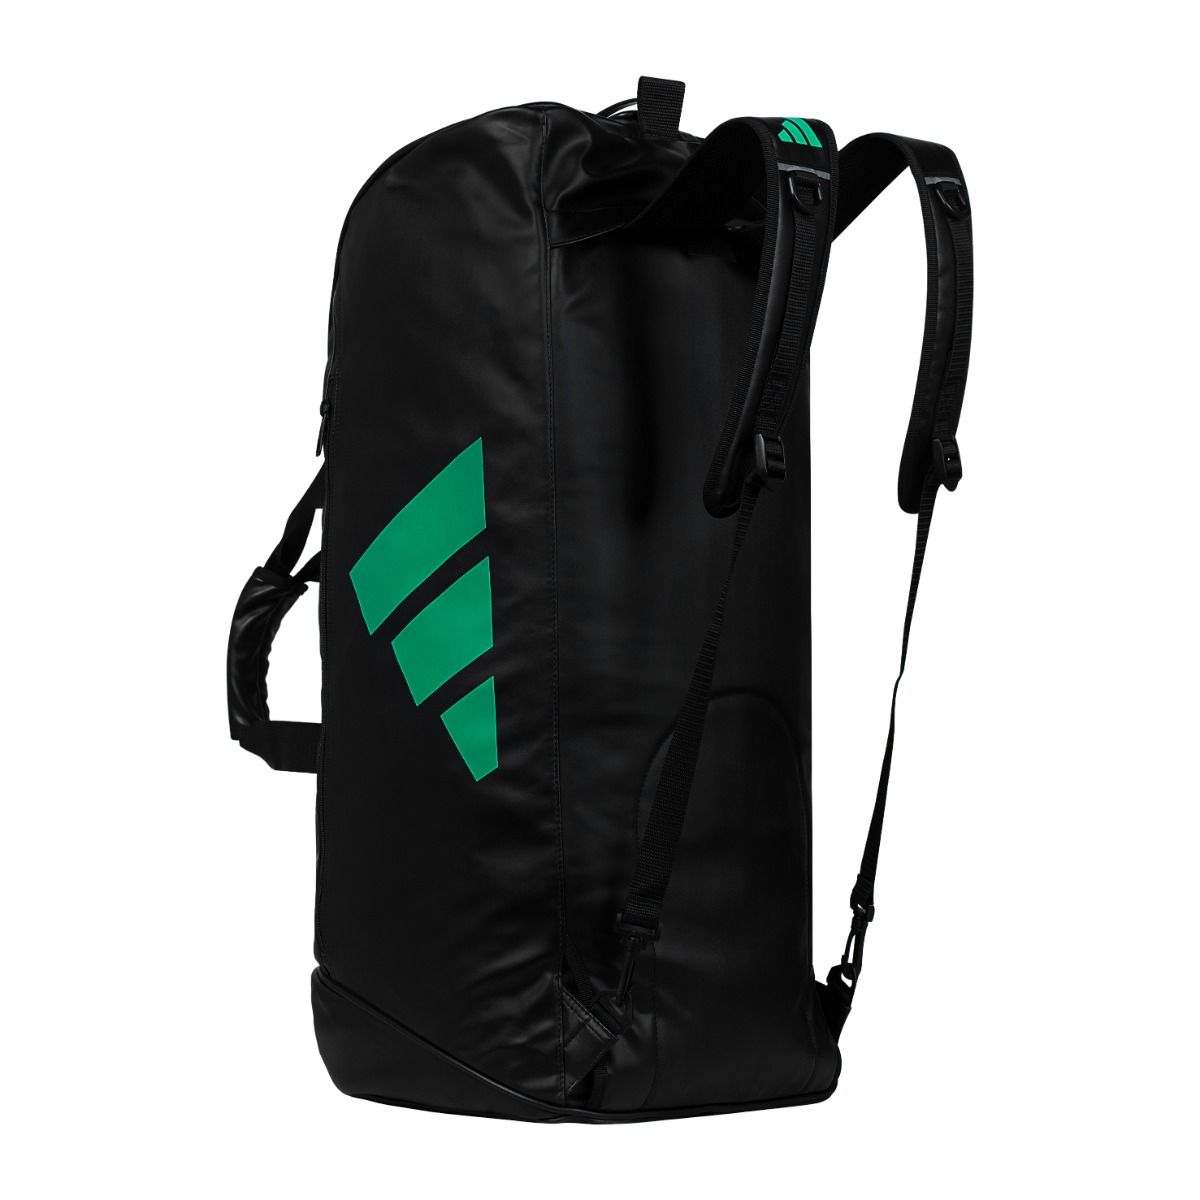 ADIDAS PU 2 IN 1 WBC BOXING HOLDALL